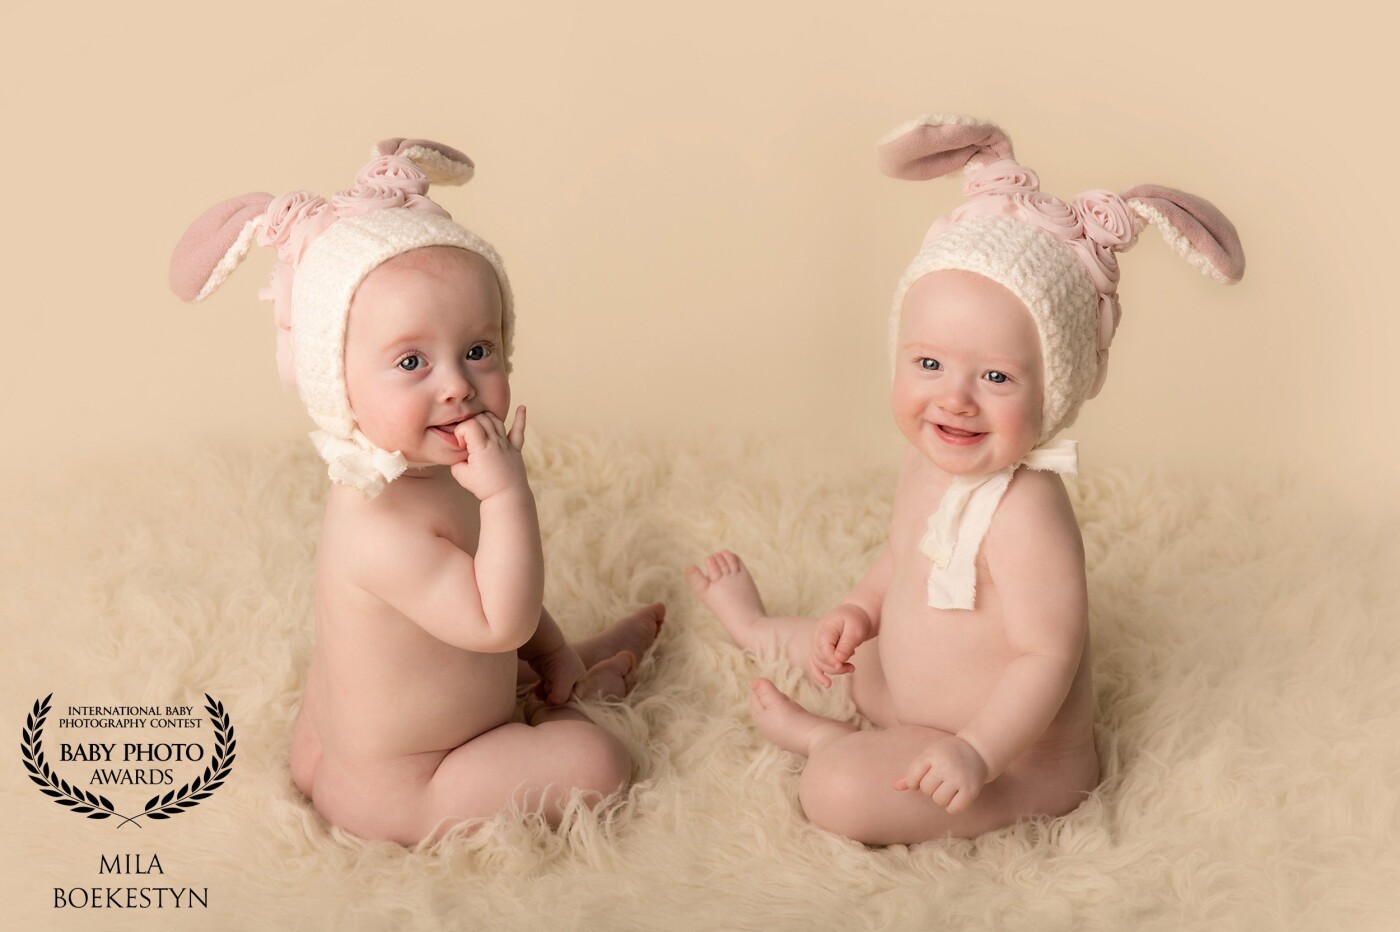 I have been photographing these 2 bunnies since they were born and this was their "Sitter" milestone session, where they were almost 9 months old.  The twins although identical, have very different personalities and it is so much fun to see them grow.  This specific image was a composite of 2 images of each individual sister separately as sometimes it is hard with twins to get them awake and happy at the same time - so when one was napping I was taking pictures of the other one.